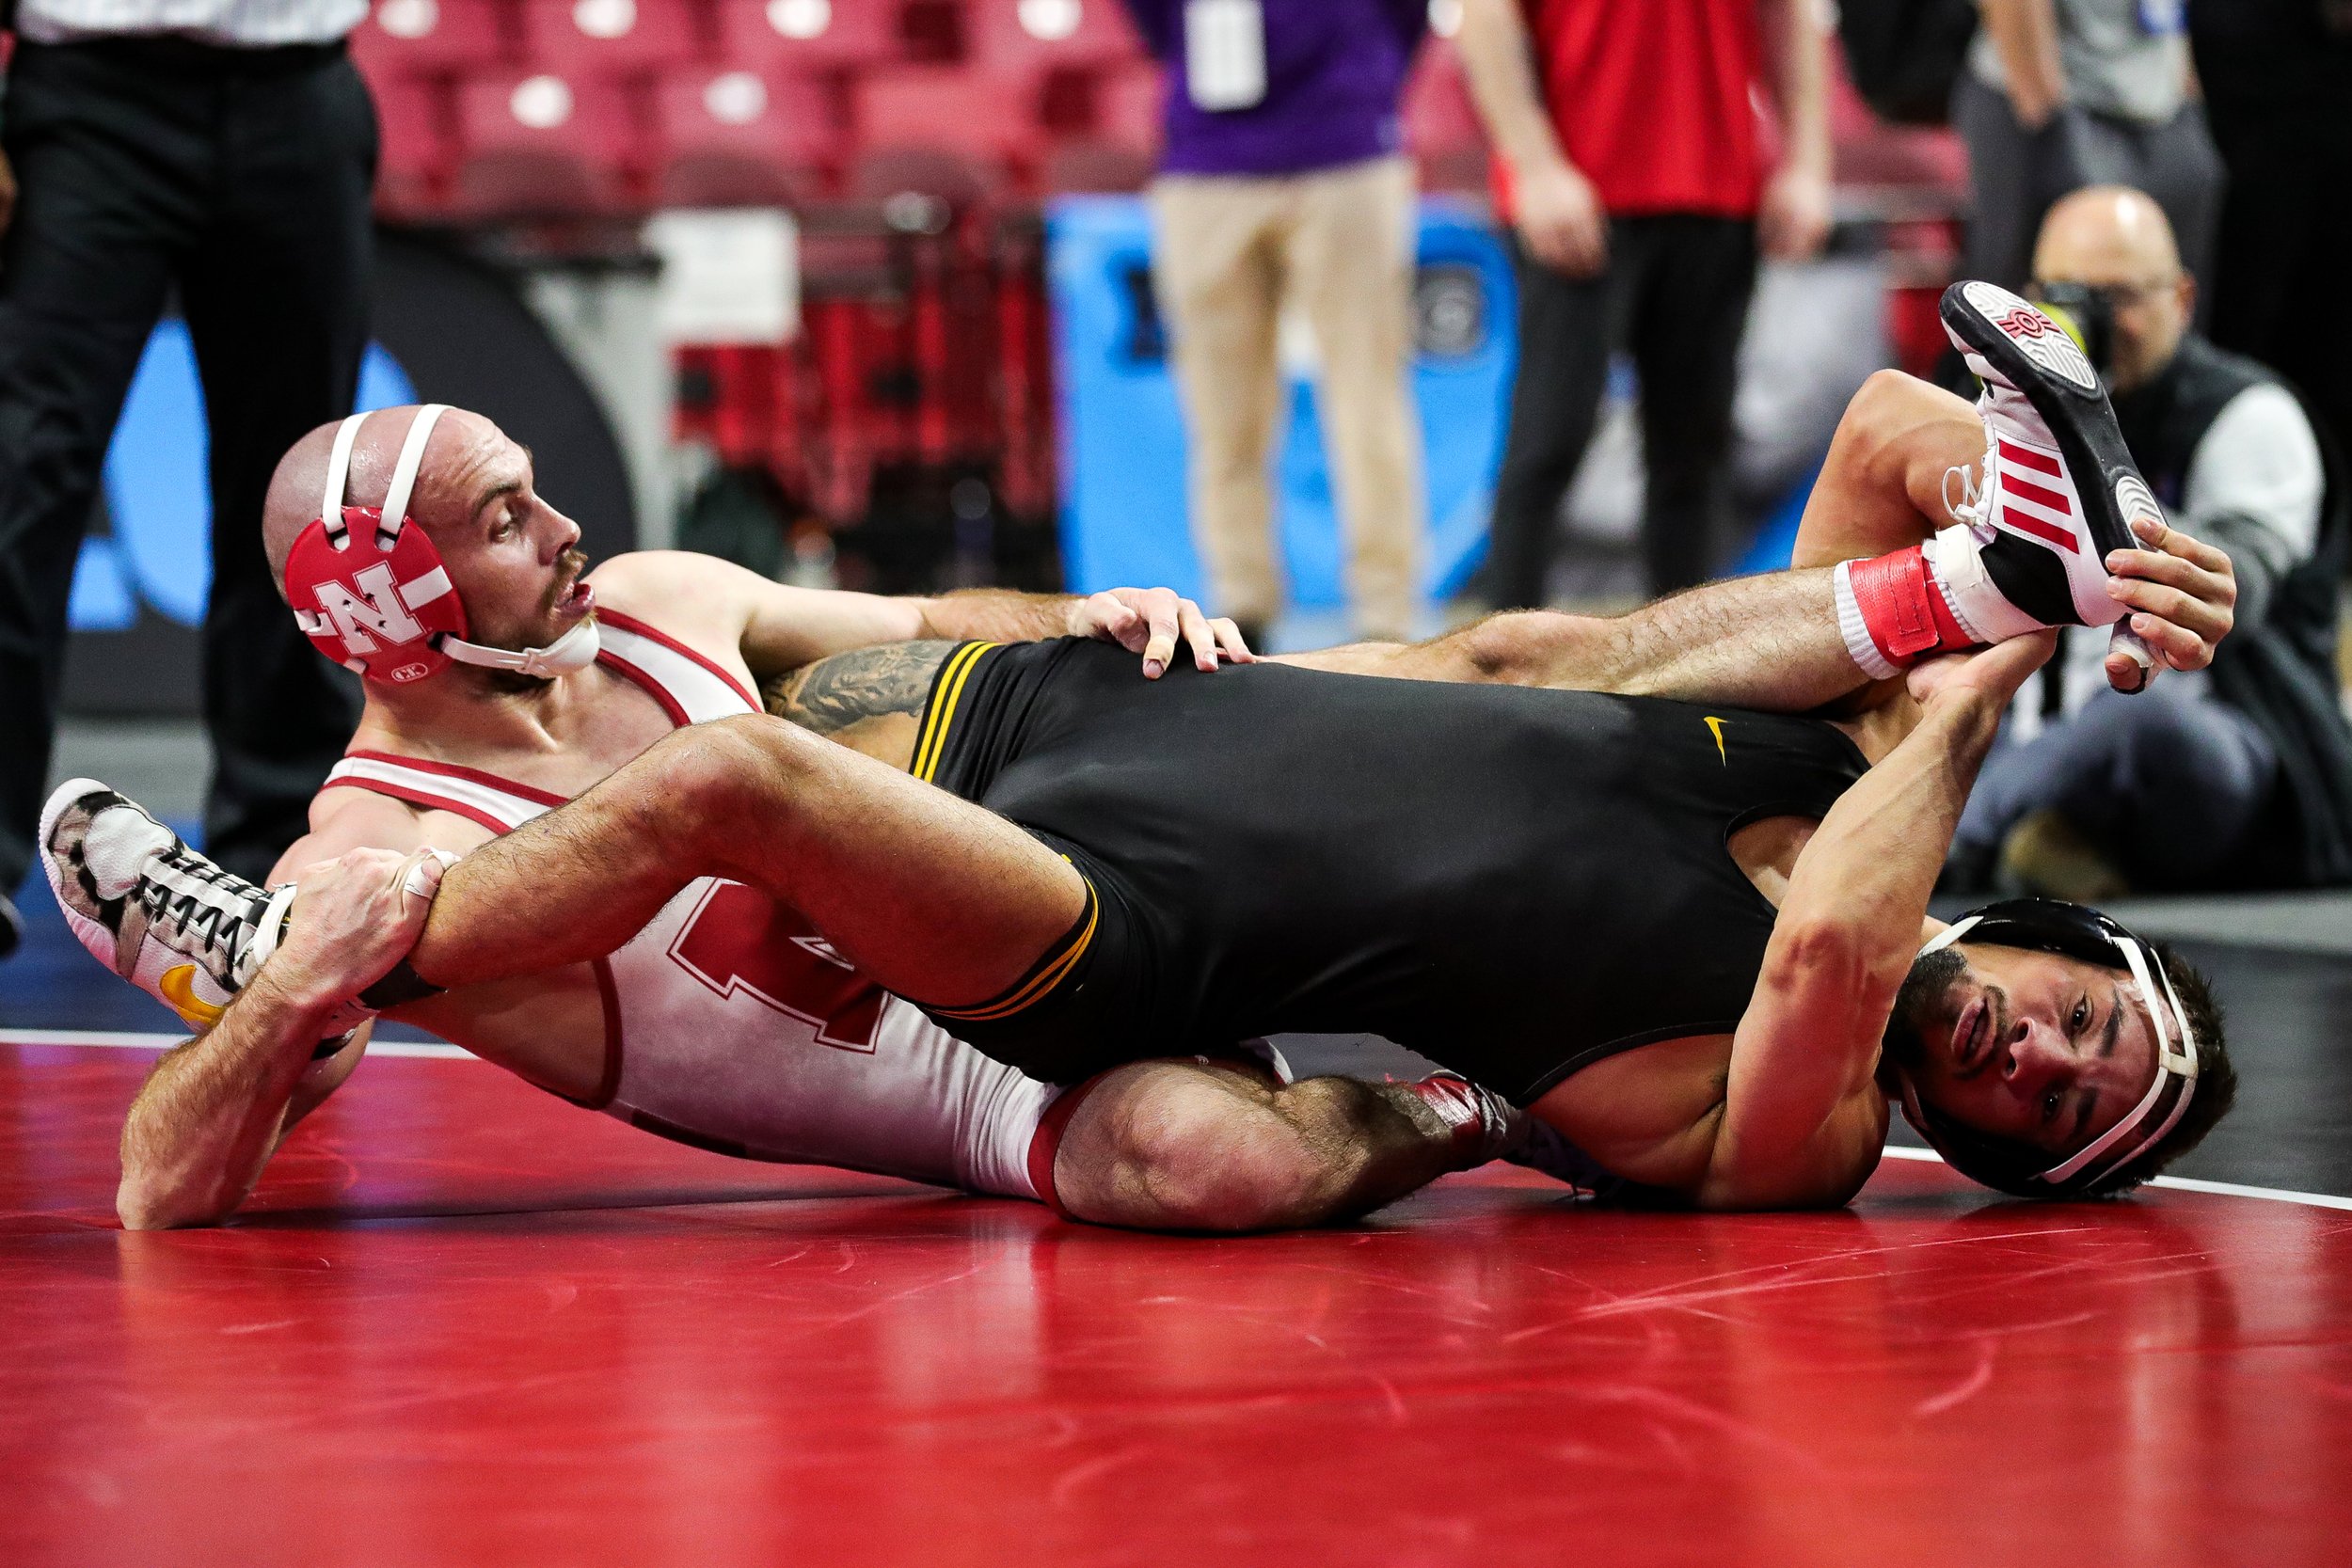  Iowa wrestler Real Woods grapples with Nebraska’s Brock Hardy in a 141-lb semifinal consolation match during the Big Ten Wrestling Championships at the Xfinity Center in College Park, Maryland on Sunday March 10, 2023. Woods won 8-4. (David Harmanta